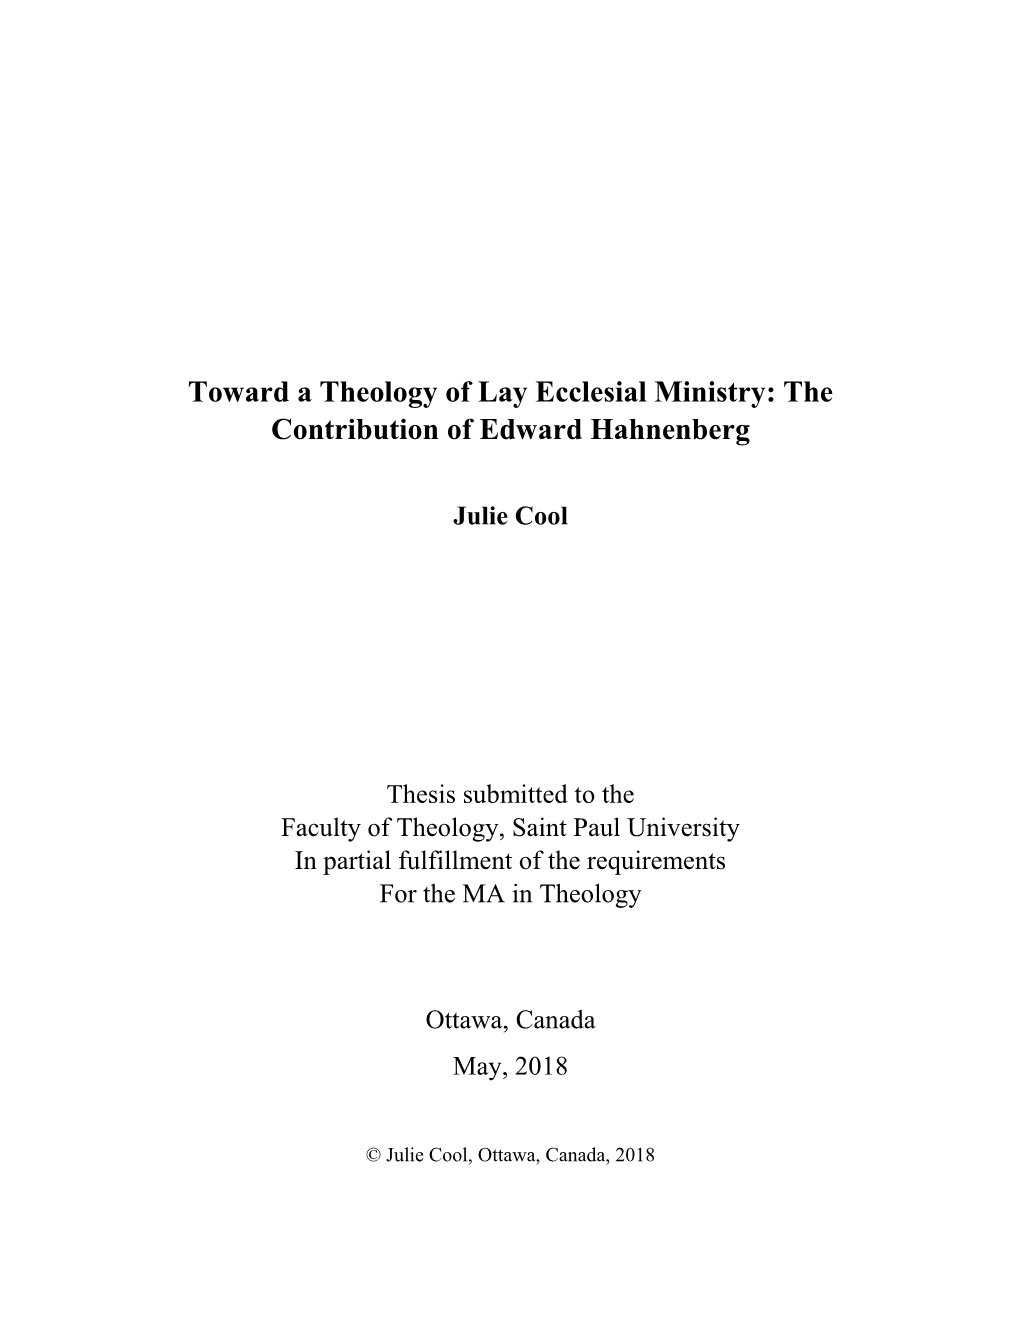 Toward a Theology of Lay Ecclesial Ministry: the Contribution of Edward Hahnenberg